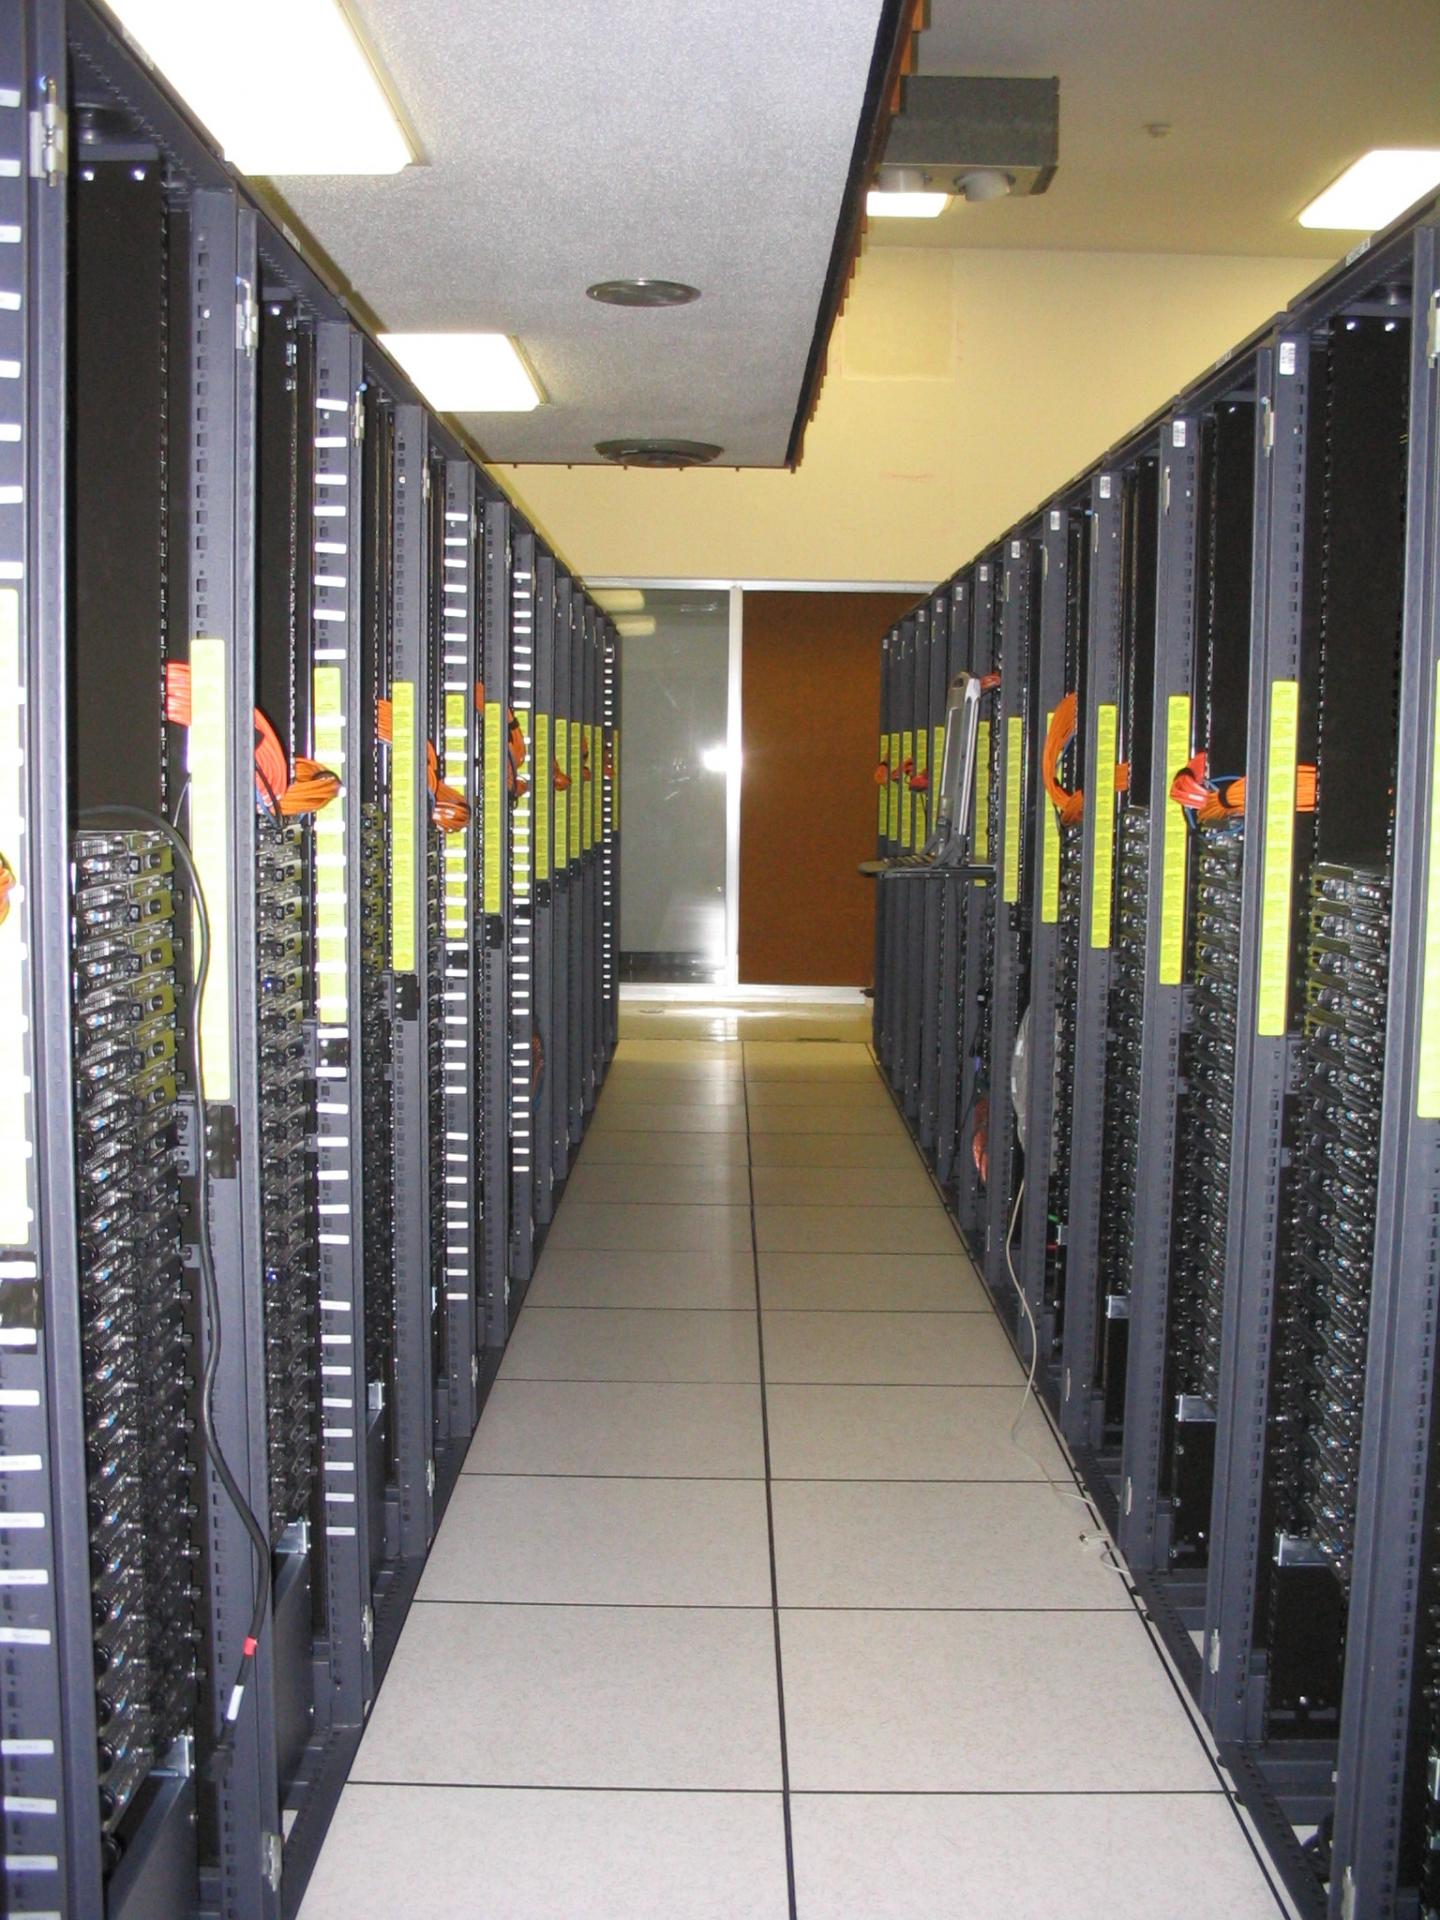 OU Supercomputing Center on the University Research Campus